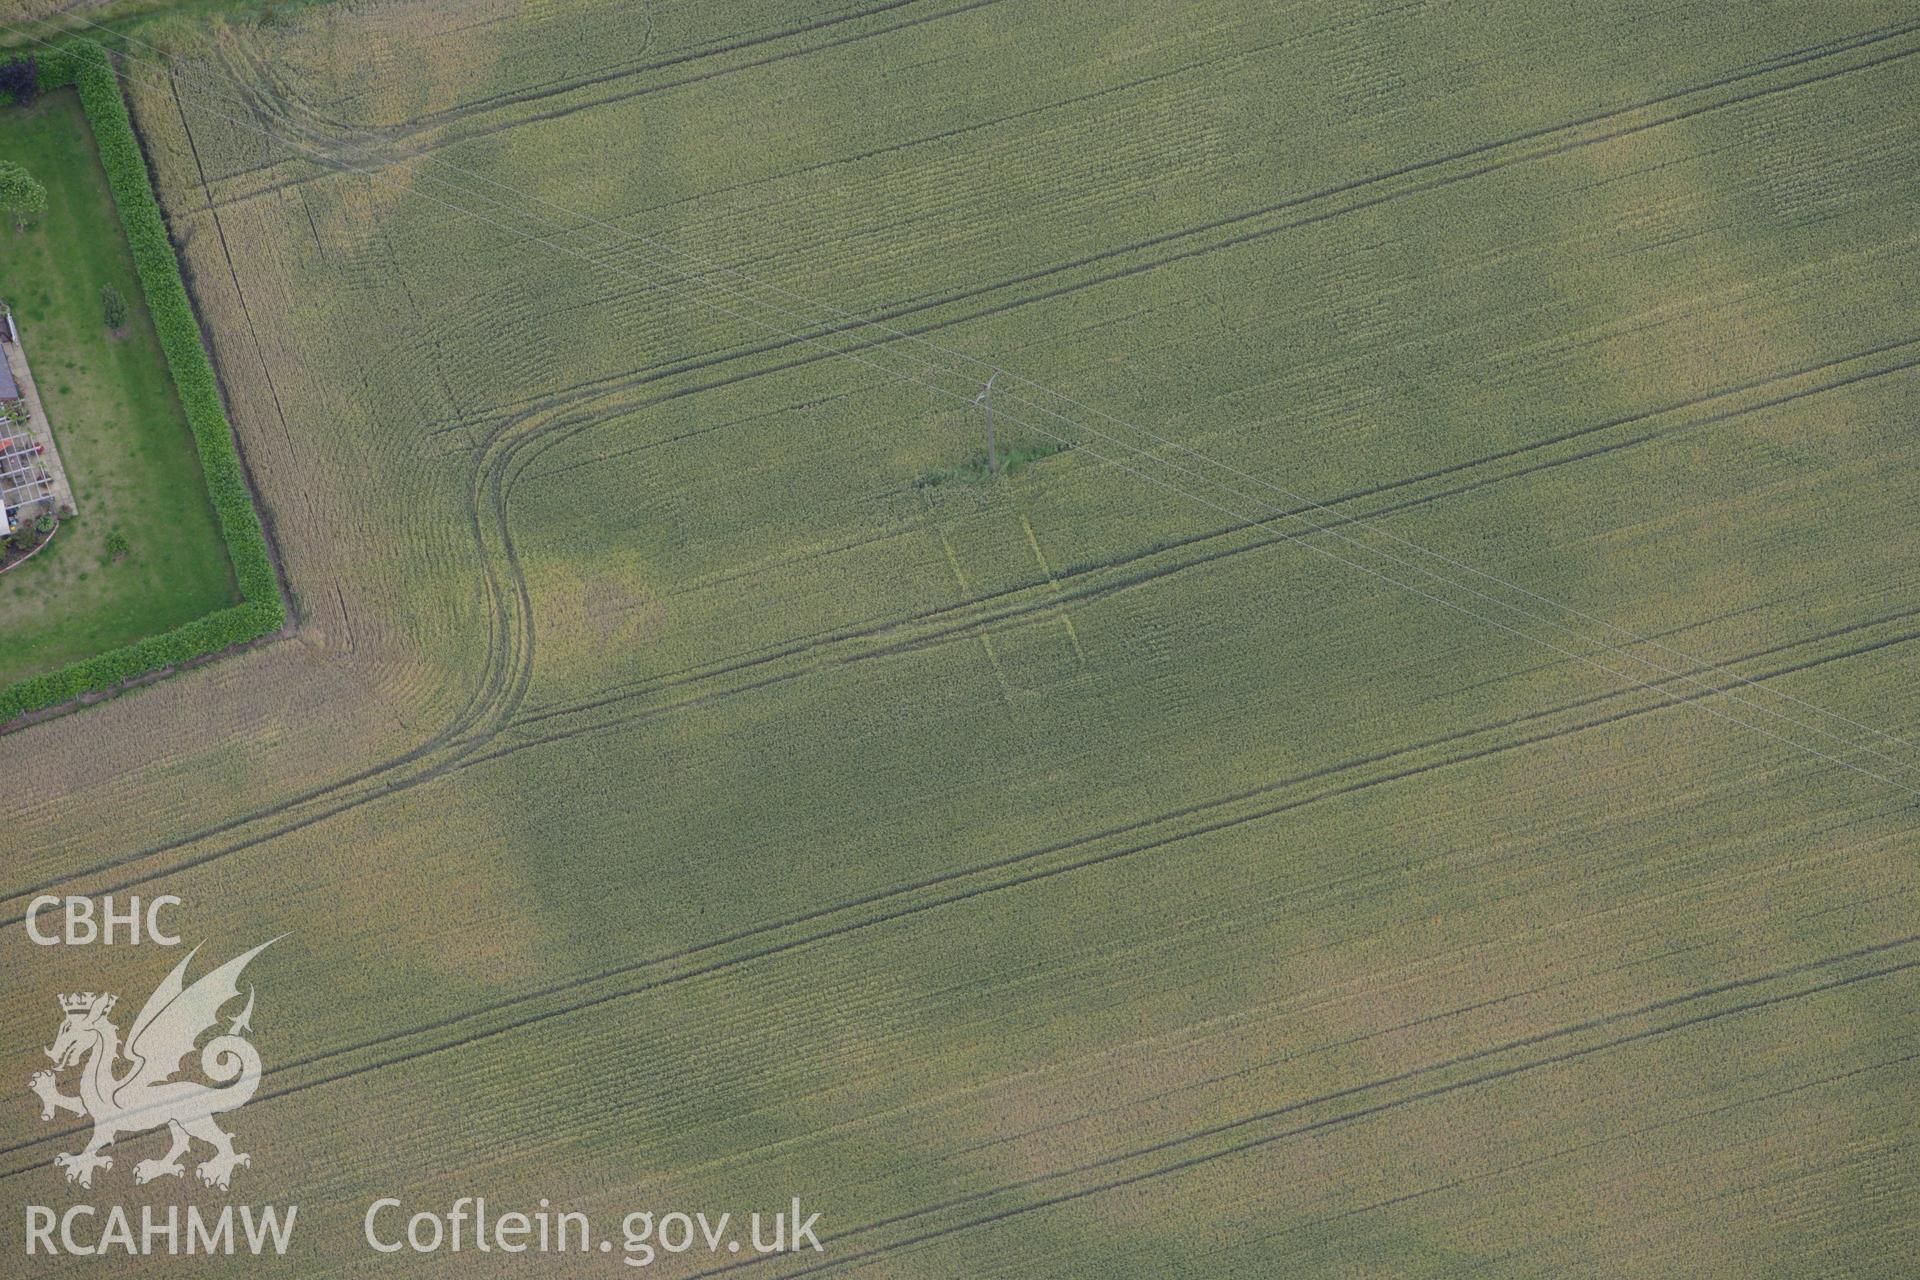 RCAHMW colour oblique aerial photograph of rectangular building cropmarks at Lane Farm. Taken on 08 July 2009 by Toby Driver